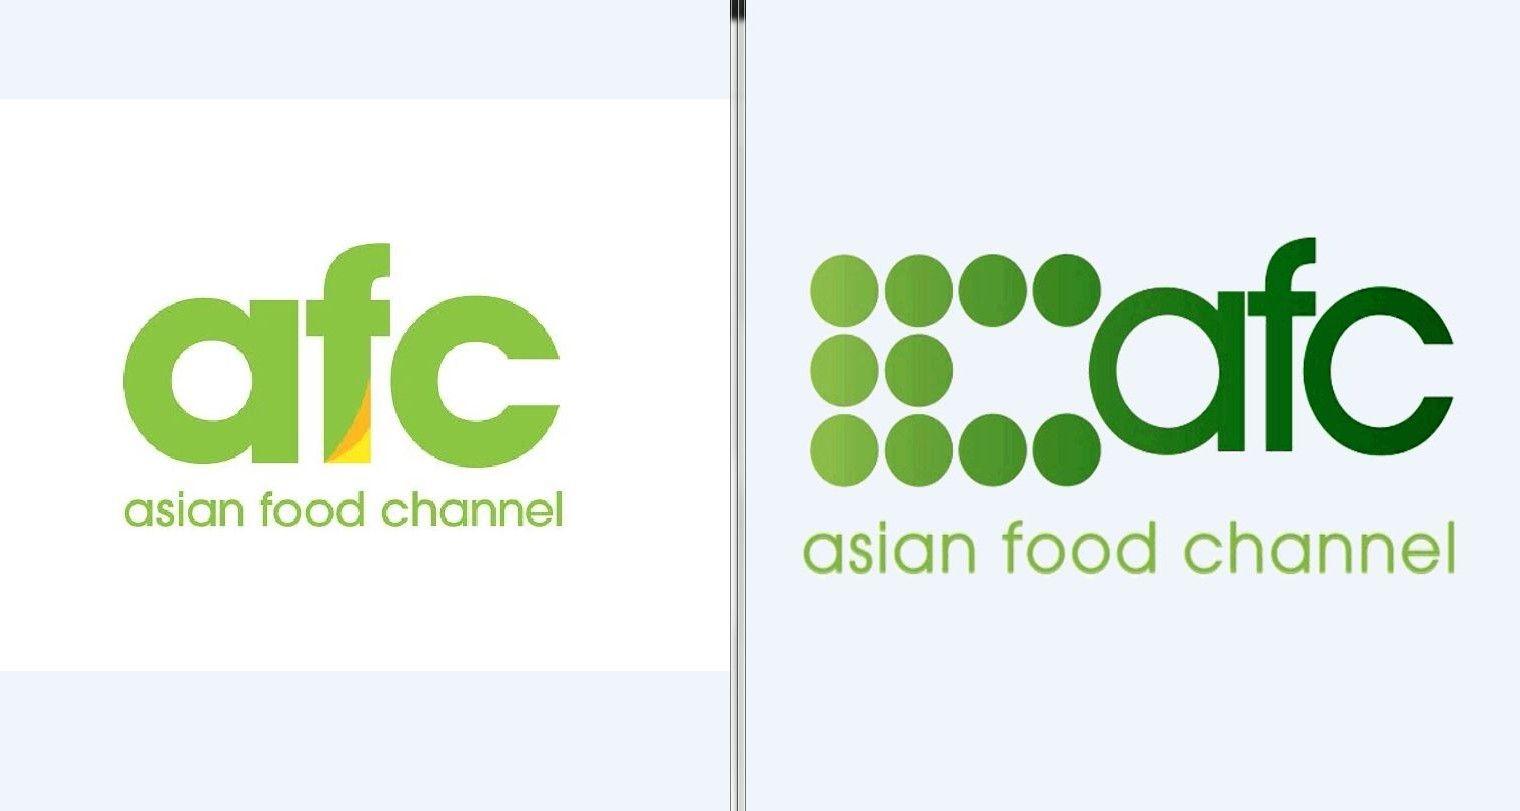 Food Network Logo - Asian Food Channel unveils new logo | Marketing Interactive